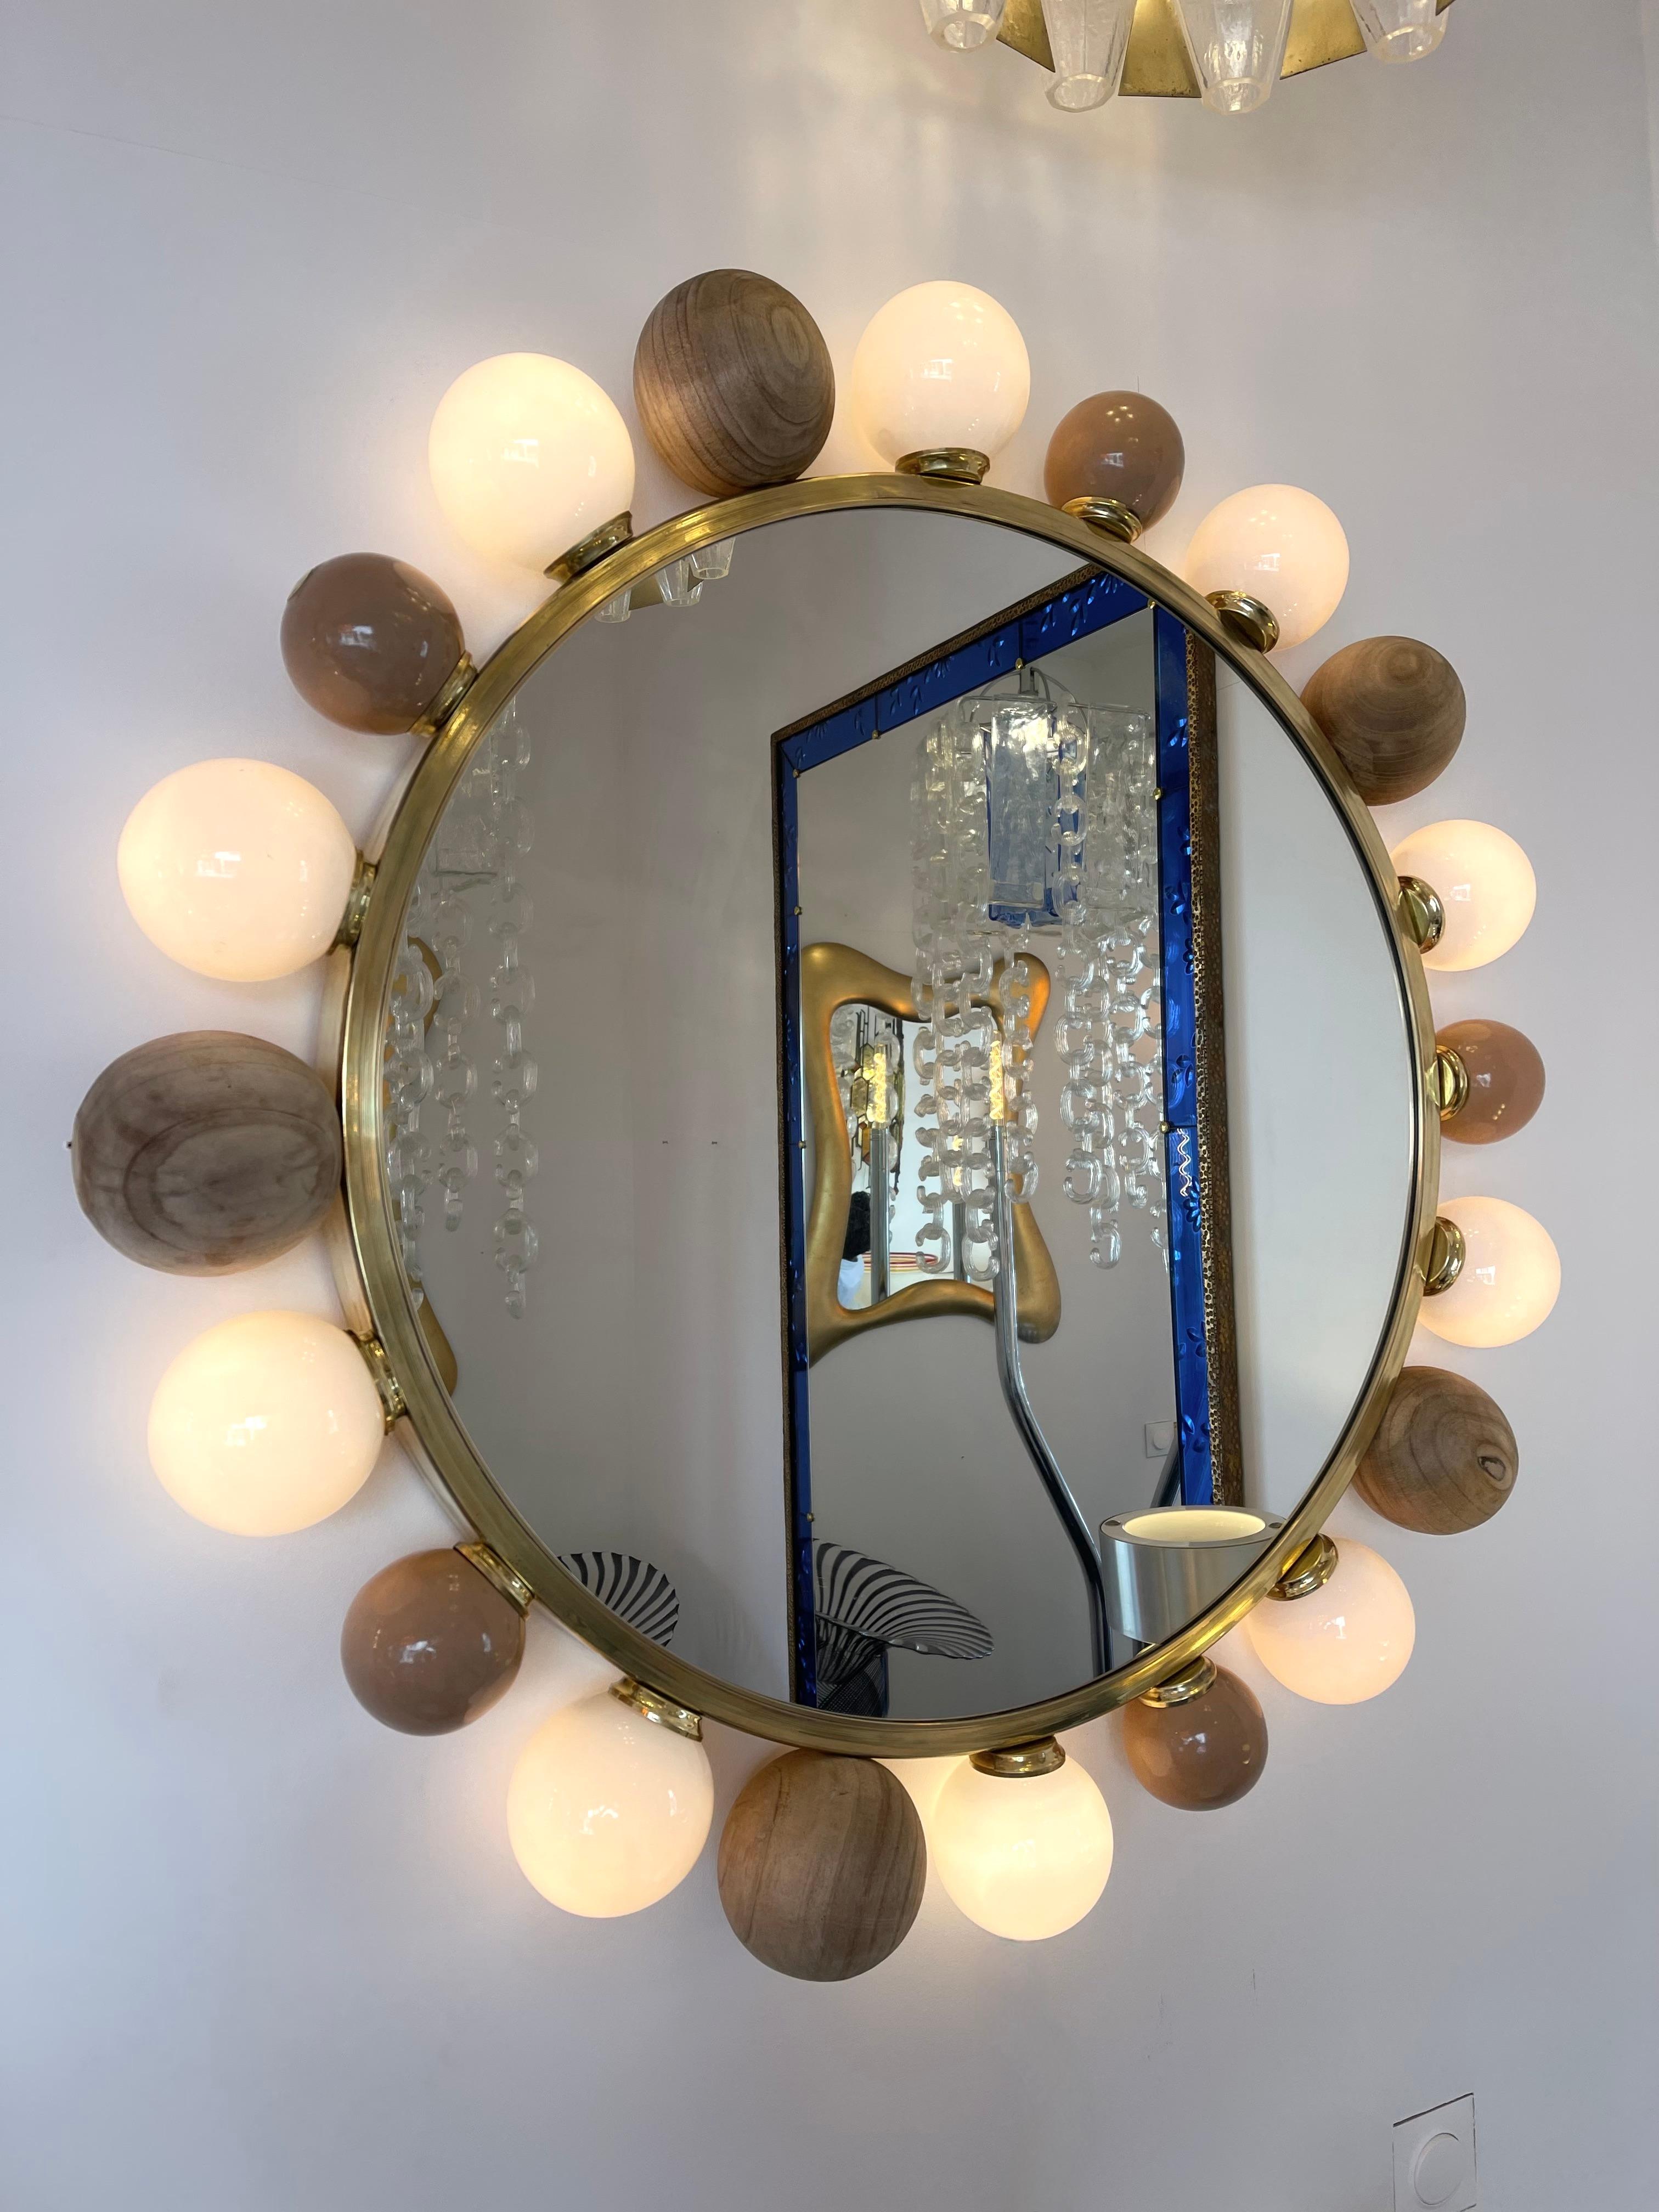 Lightning lamp sconces pannel wall Mirror in brass , Murano glass, ceramic terracotta, wood balls. Contemporary work from a small italian artisanal workshop.